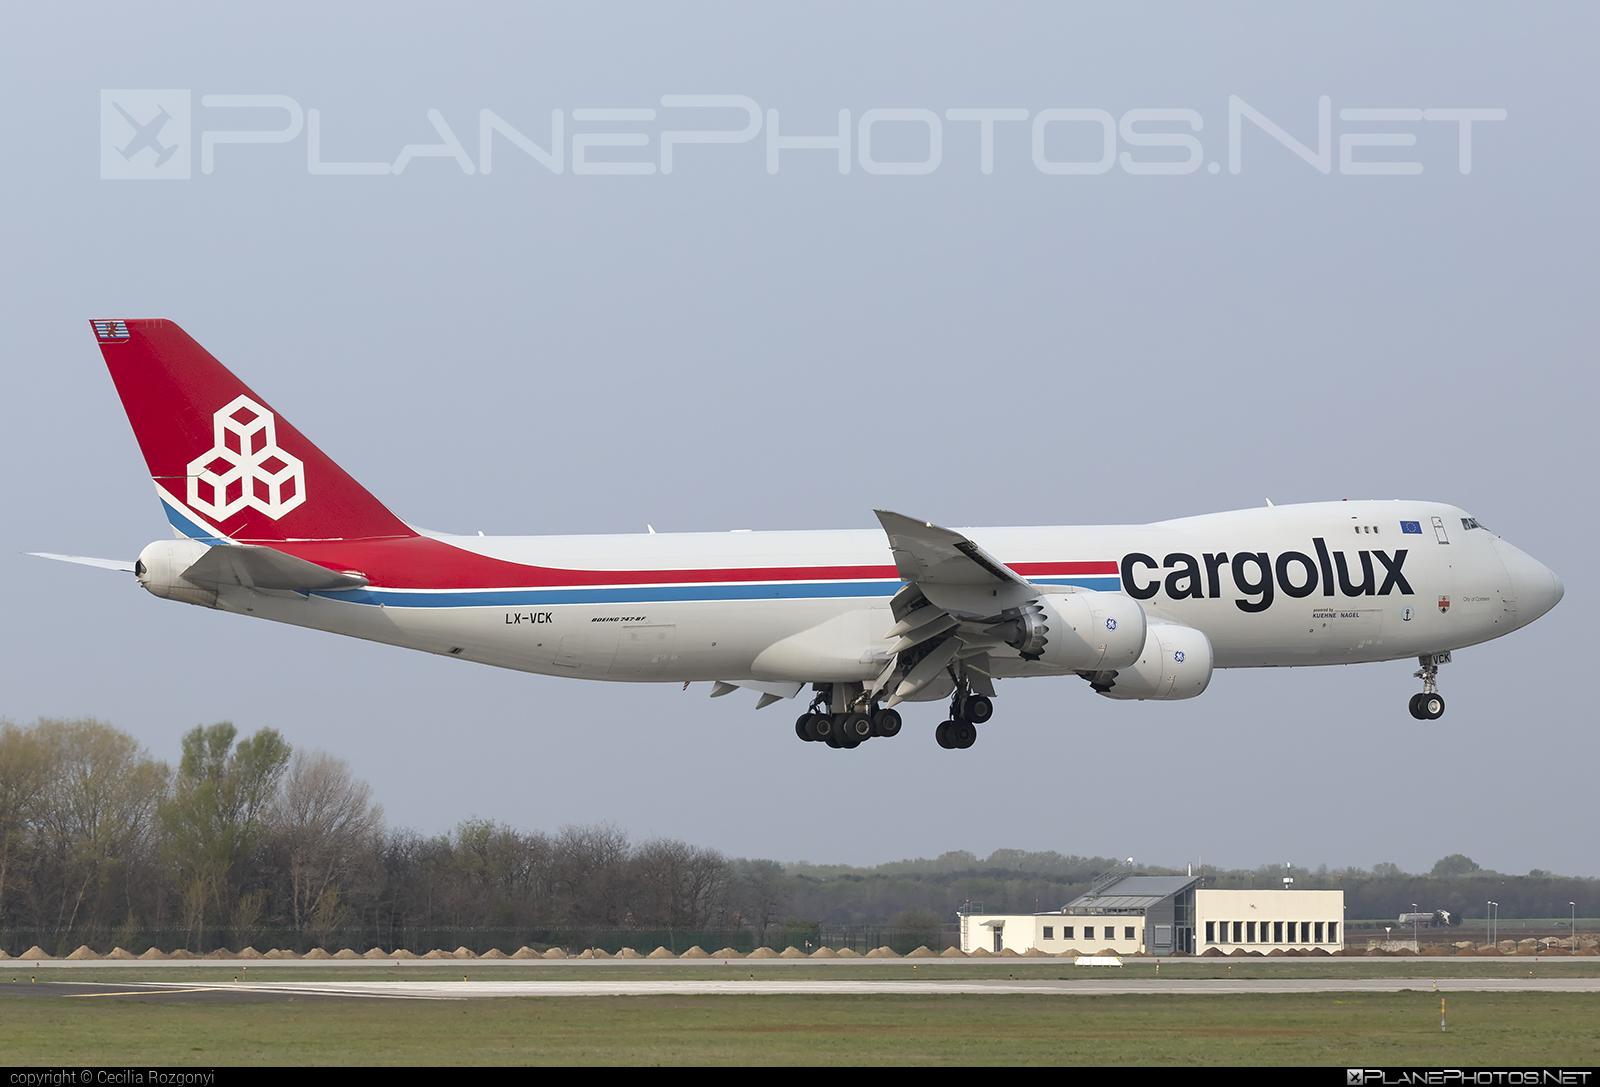 Boeing 747-8F - LX-VCK operated by Cargolux Airlines International #b747 #b747f #b747freighter #boeing #boeing747 #cargolux #jumbo